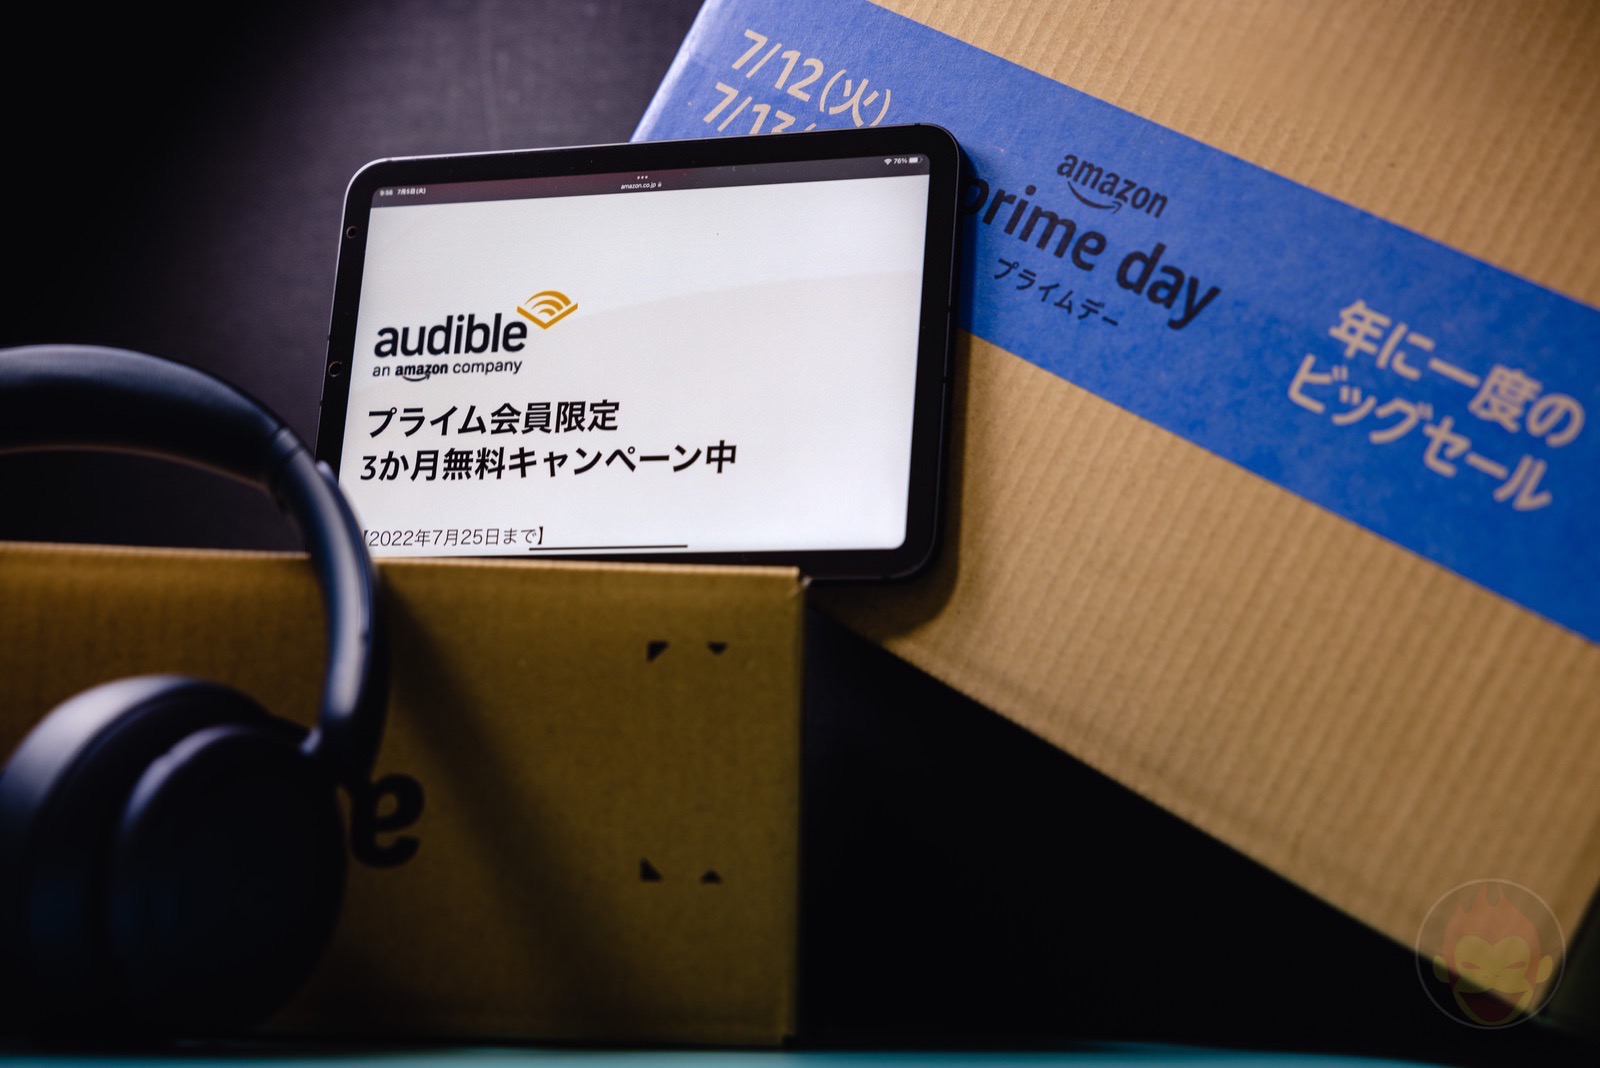 Audible 3month campaign for primeday2022 01